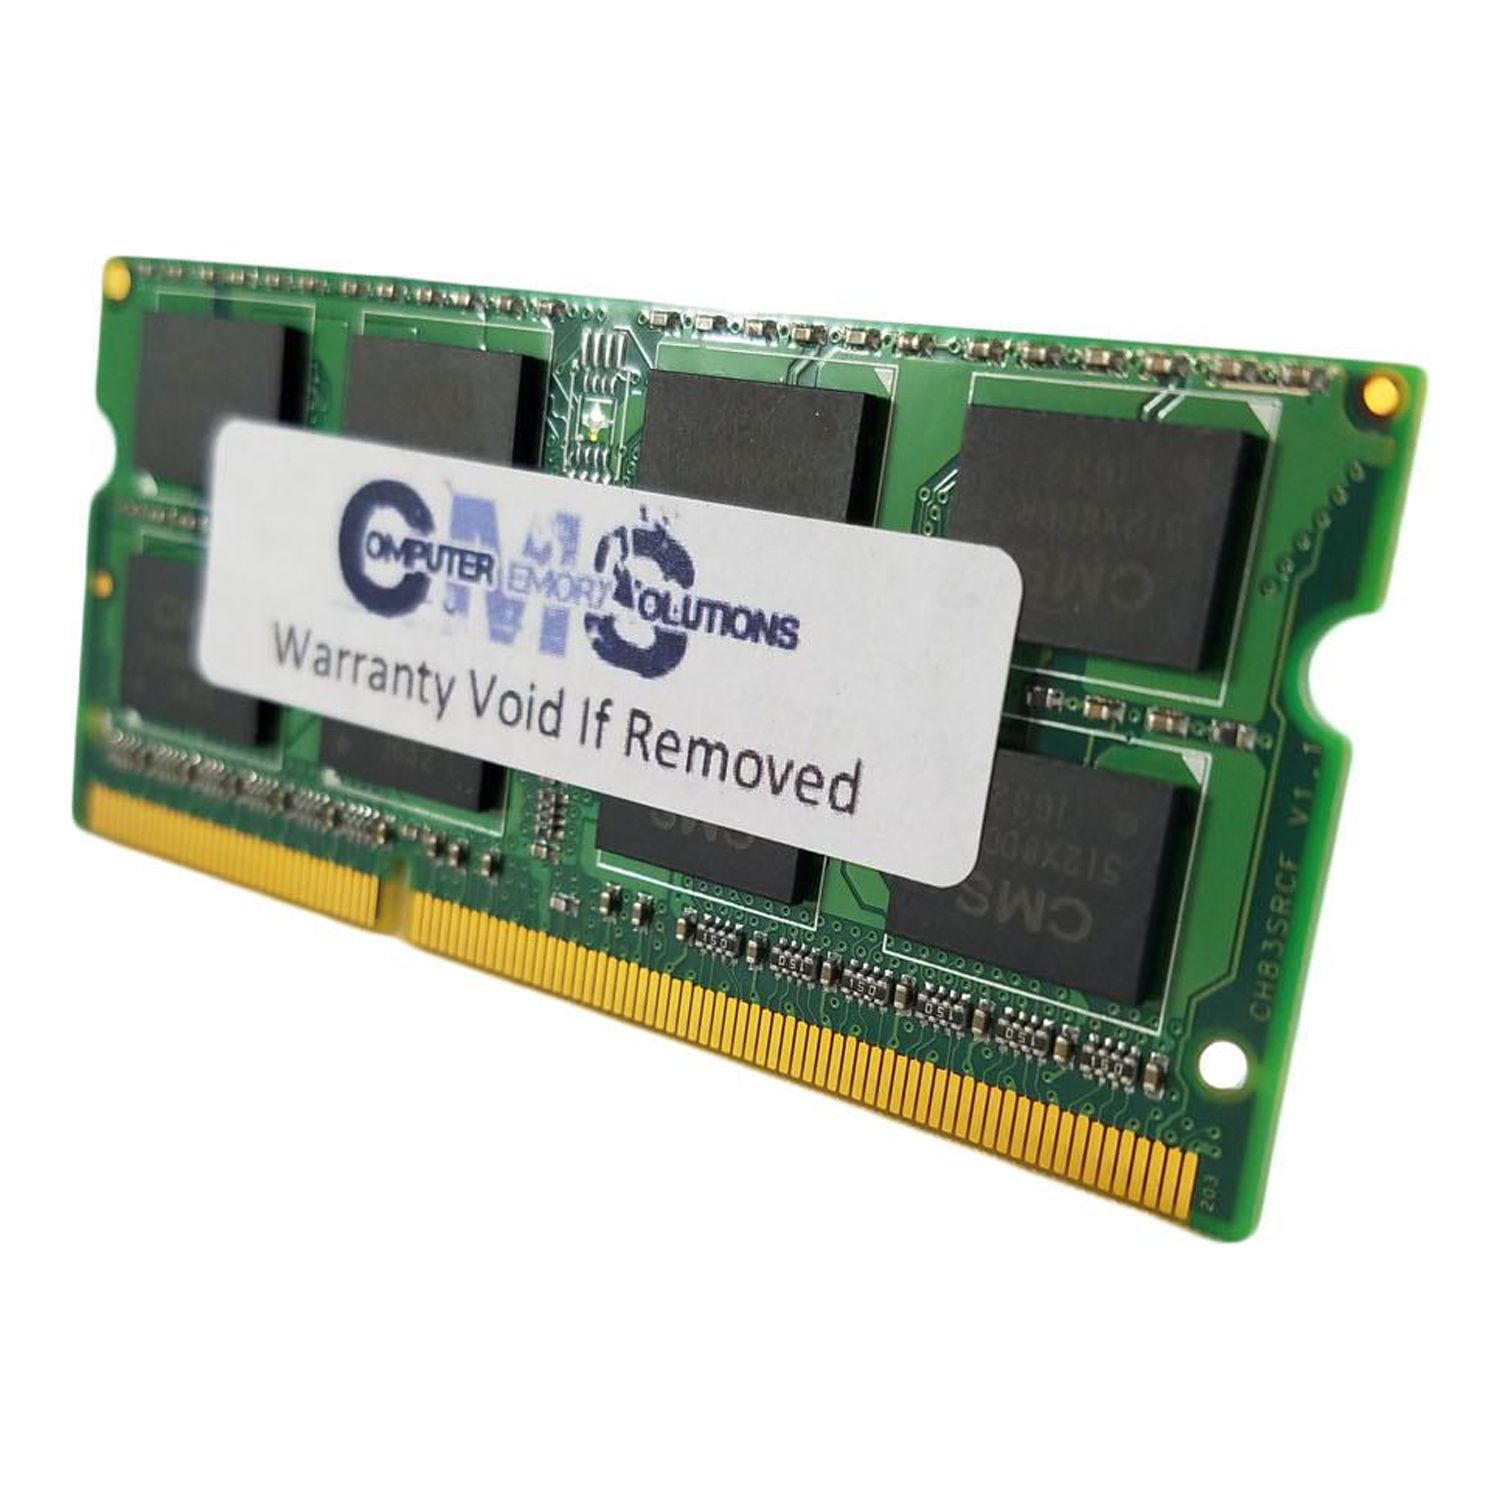 CMS 2GB (1X2GB) DDR3 8500 1066MHZ NON ECC SODIMM Memory Ram Upgrade Compatible with Toshiba® Mini Notebook Nb520 Series (Ddr3) - B123 - image 3 of 3